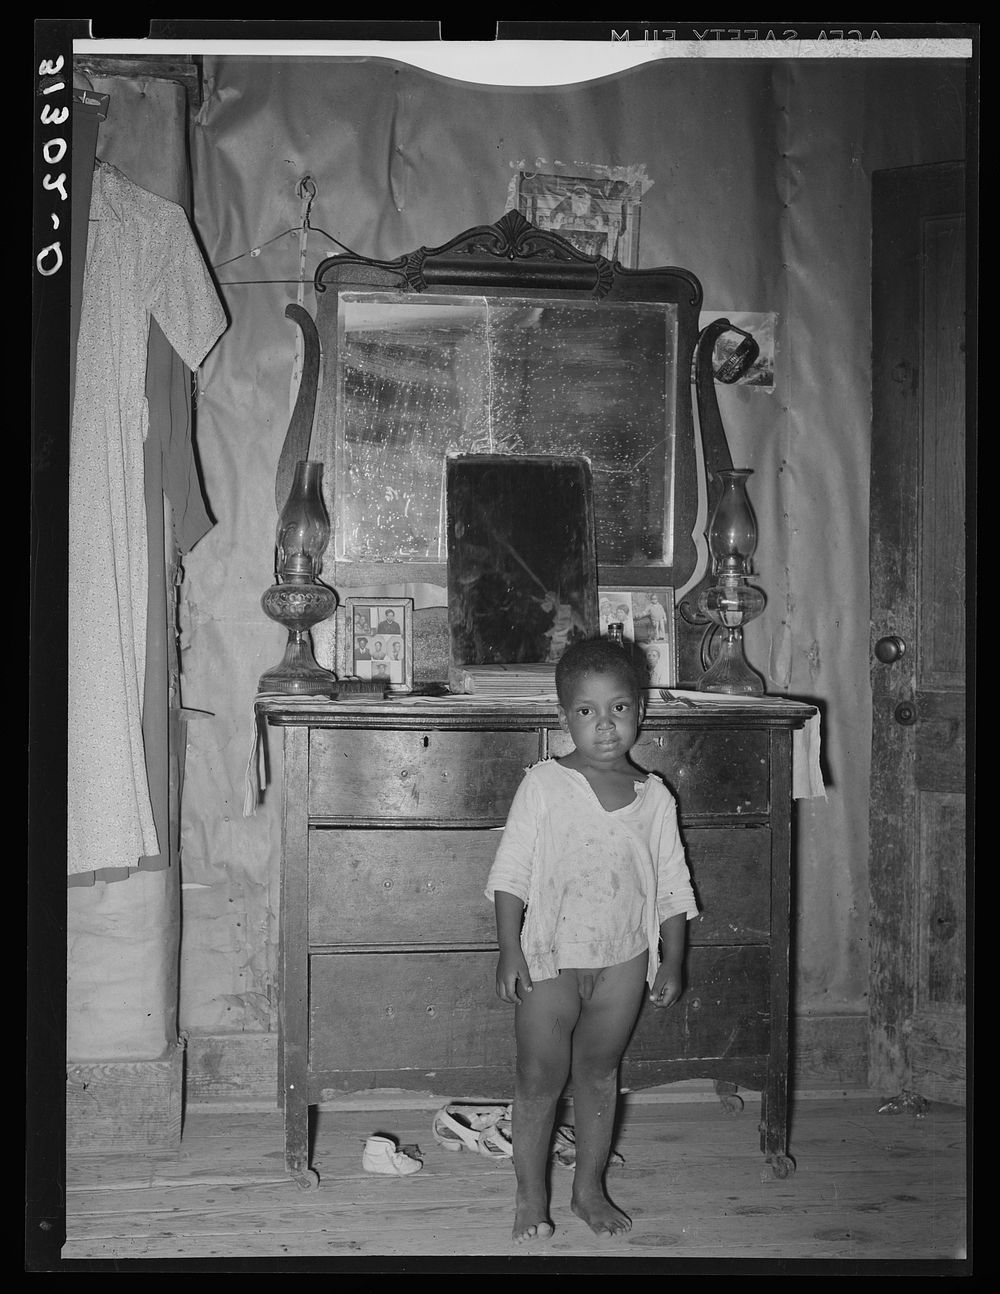 Son of sharecropper who will participate in the tenant purchase program very soon. Near Caruthersville, Missouri by Russell…